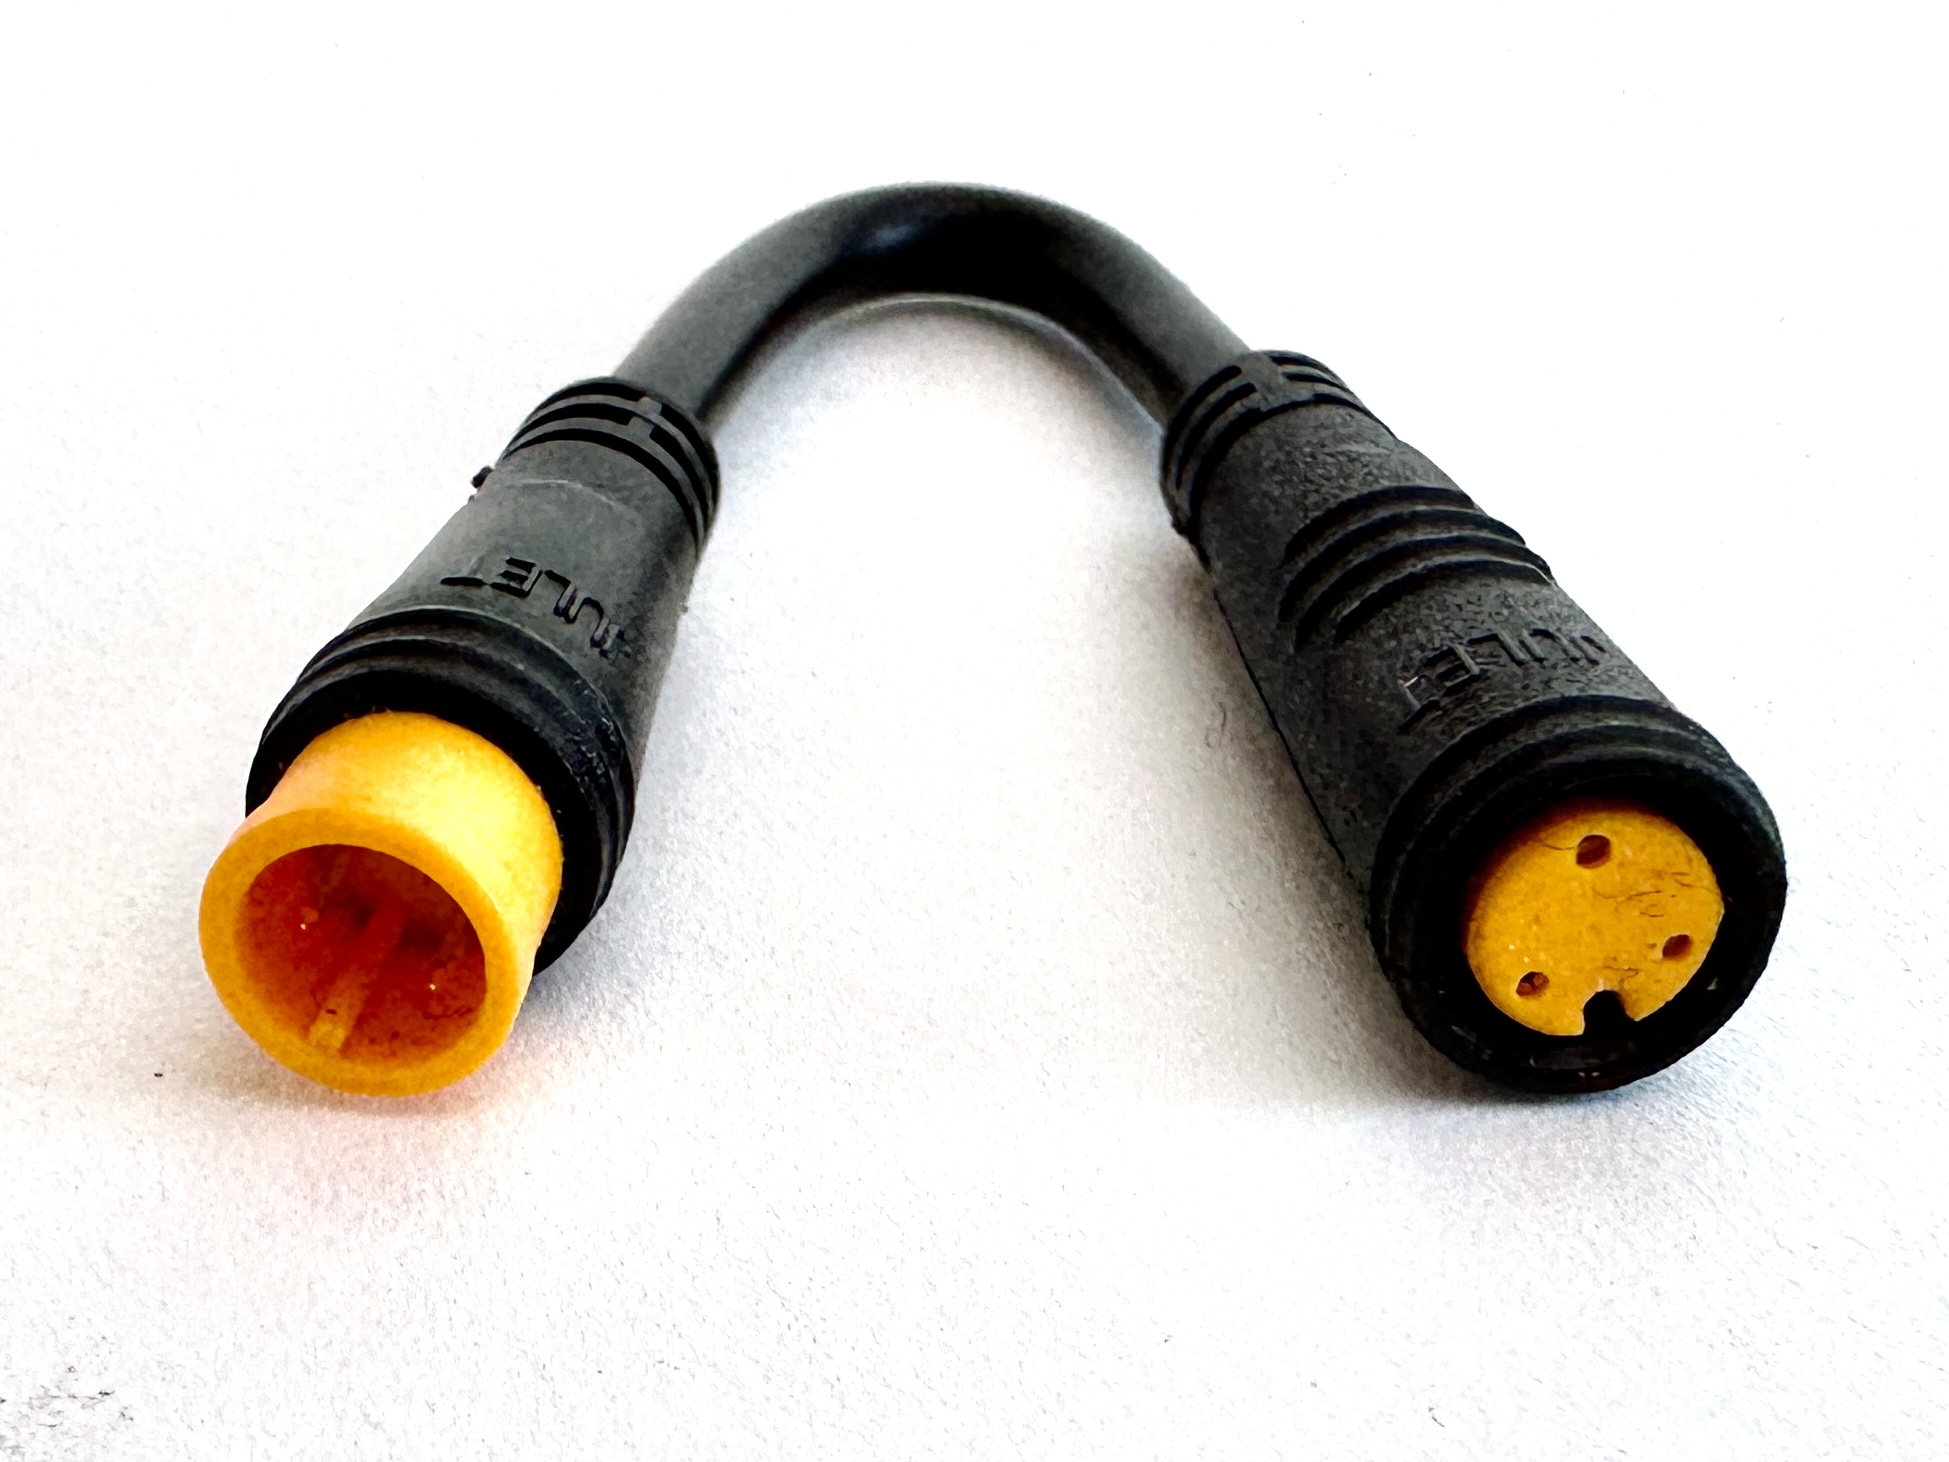 HIGO / Julet extension cable 5,5 cm for ebike, 3 PIN female to male, yellow